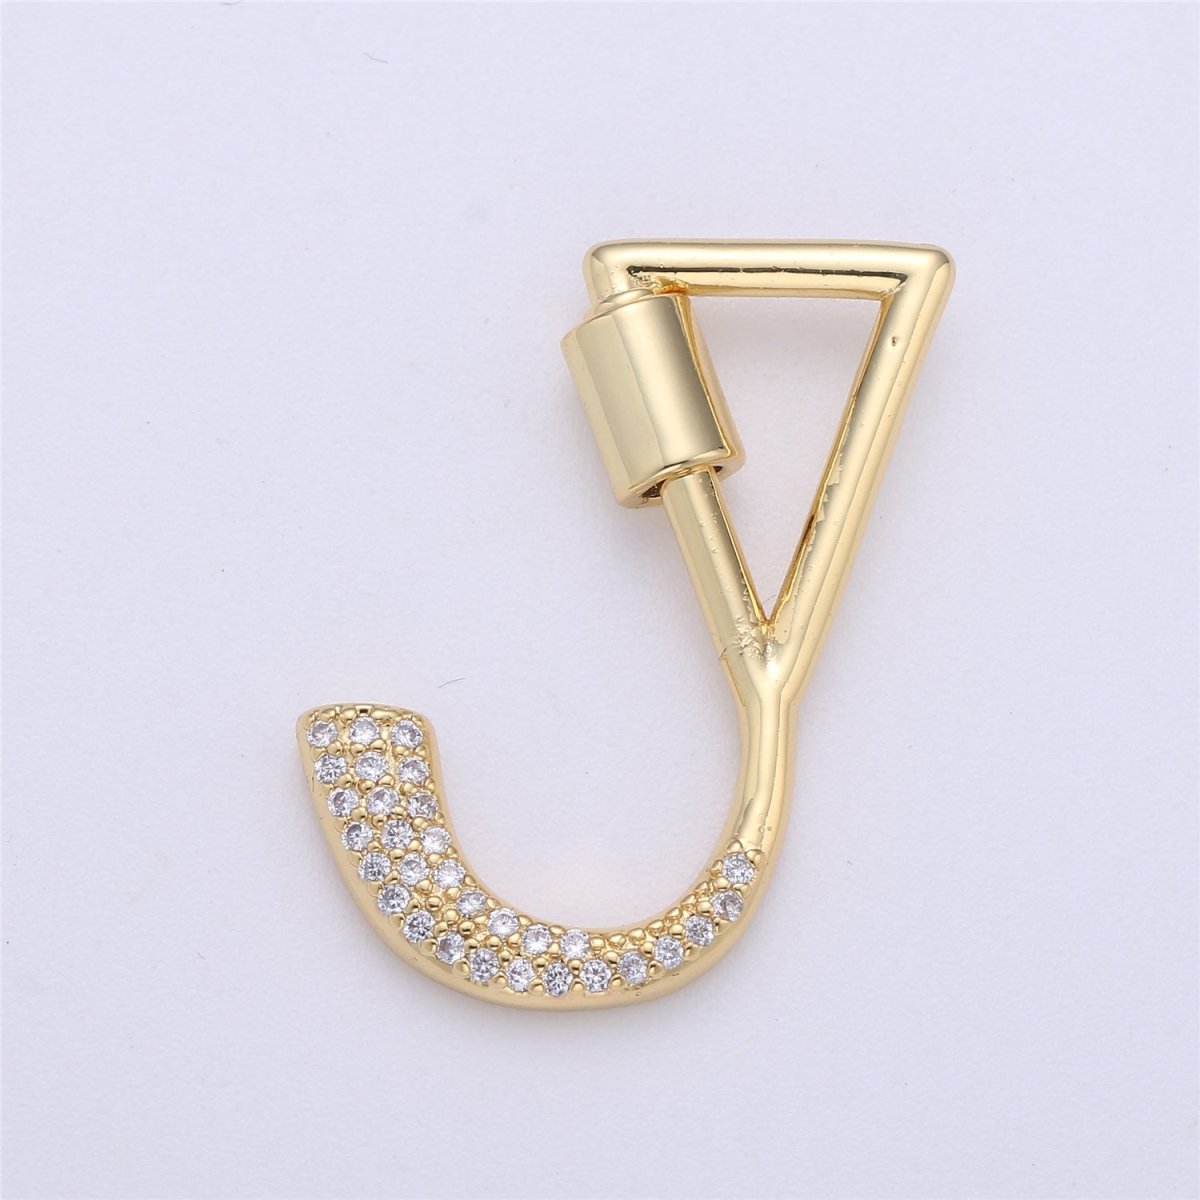 24K Gold-Plated Letter "J" Carabiner with Pave Zirconia Rhinestones, Circle Screw Clasp - DLUXCA